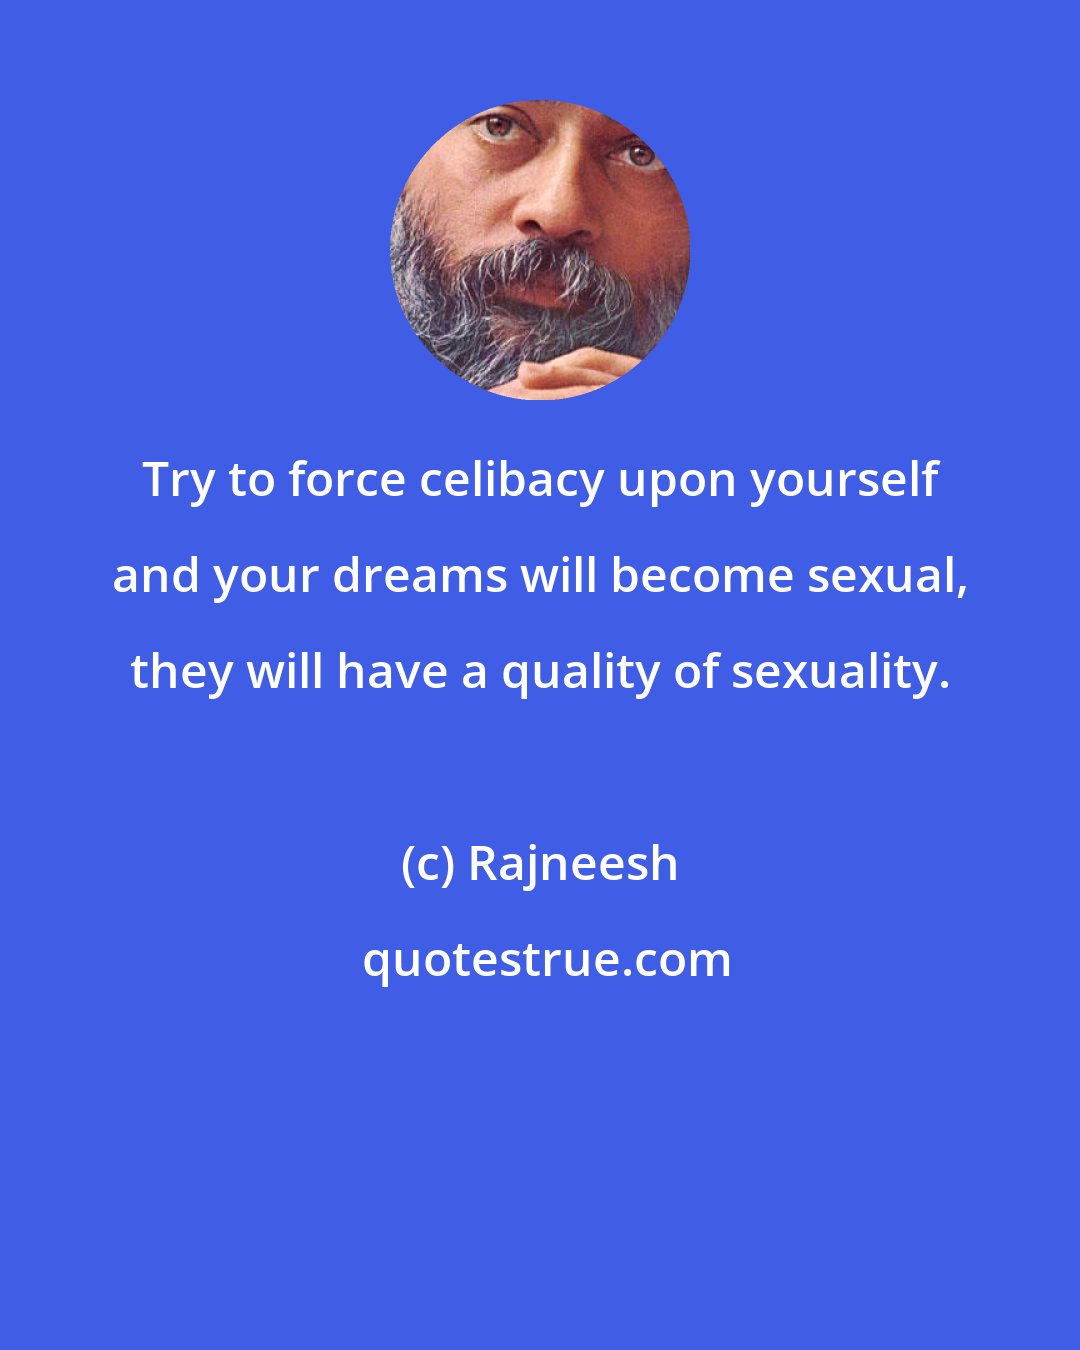 Rajneesh: Try to force celibacy upon yourself and your dreams will become sexual, they will have a quality of sexuality.